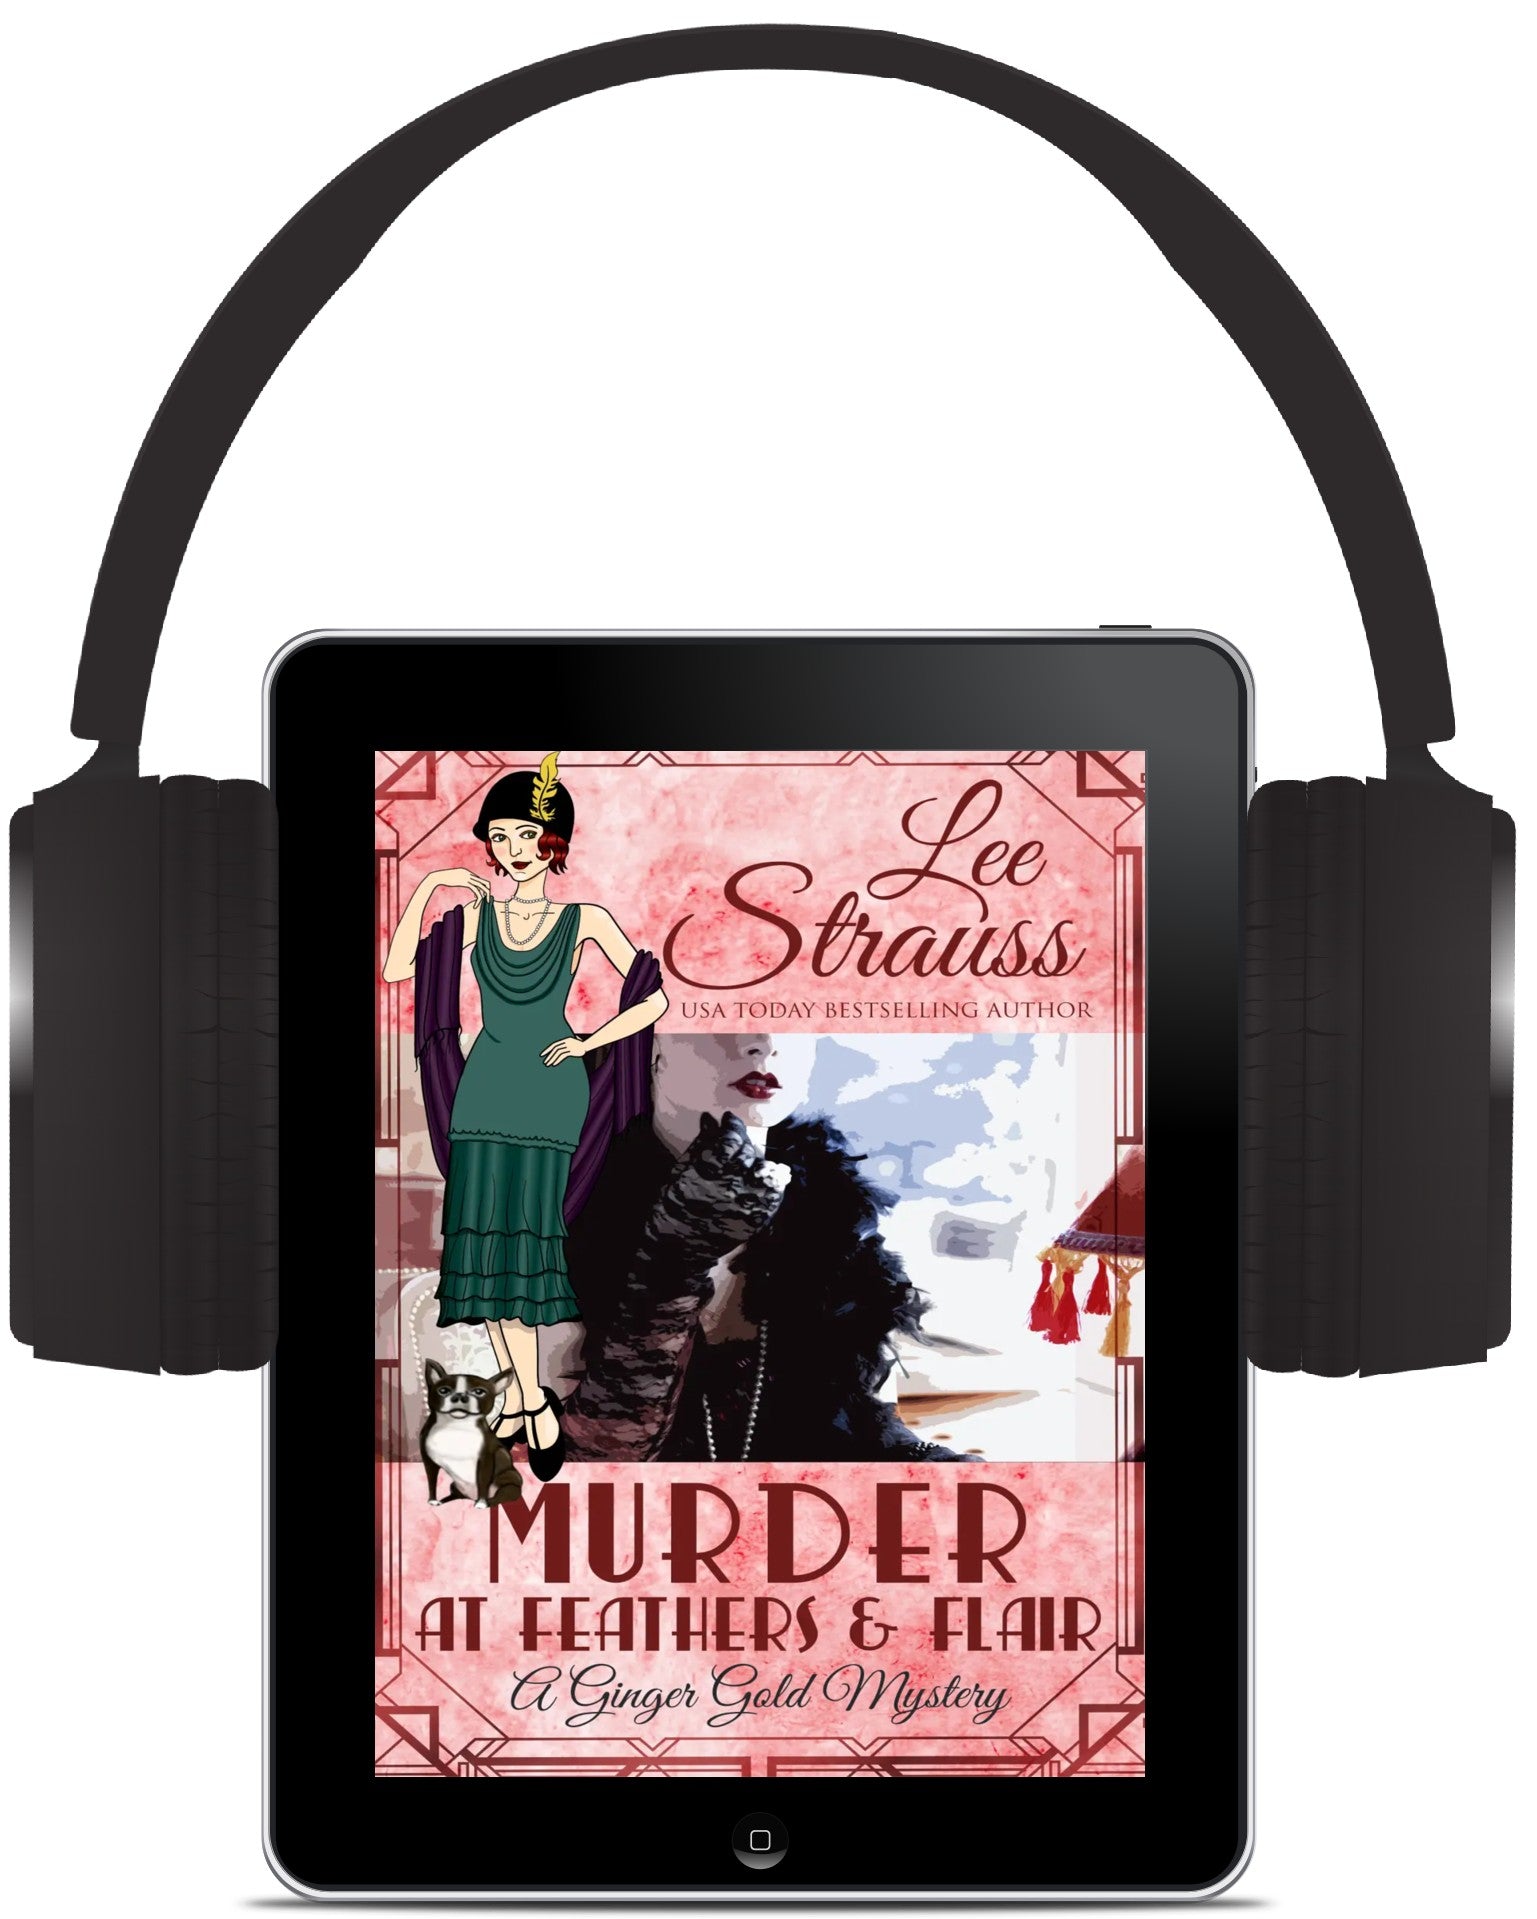 Murder at Feathers & Flair, A Ginger Gold Mystery, 1920s cozy historical mystery by Lee Strauss